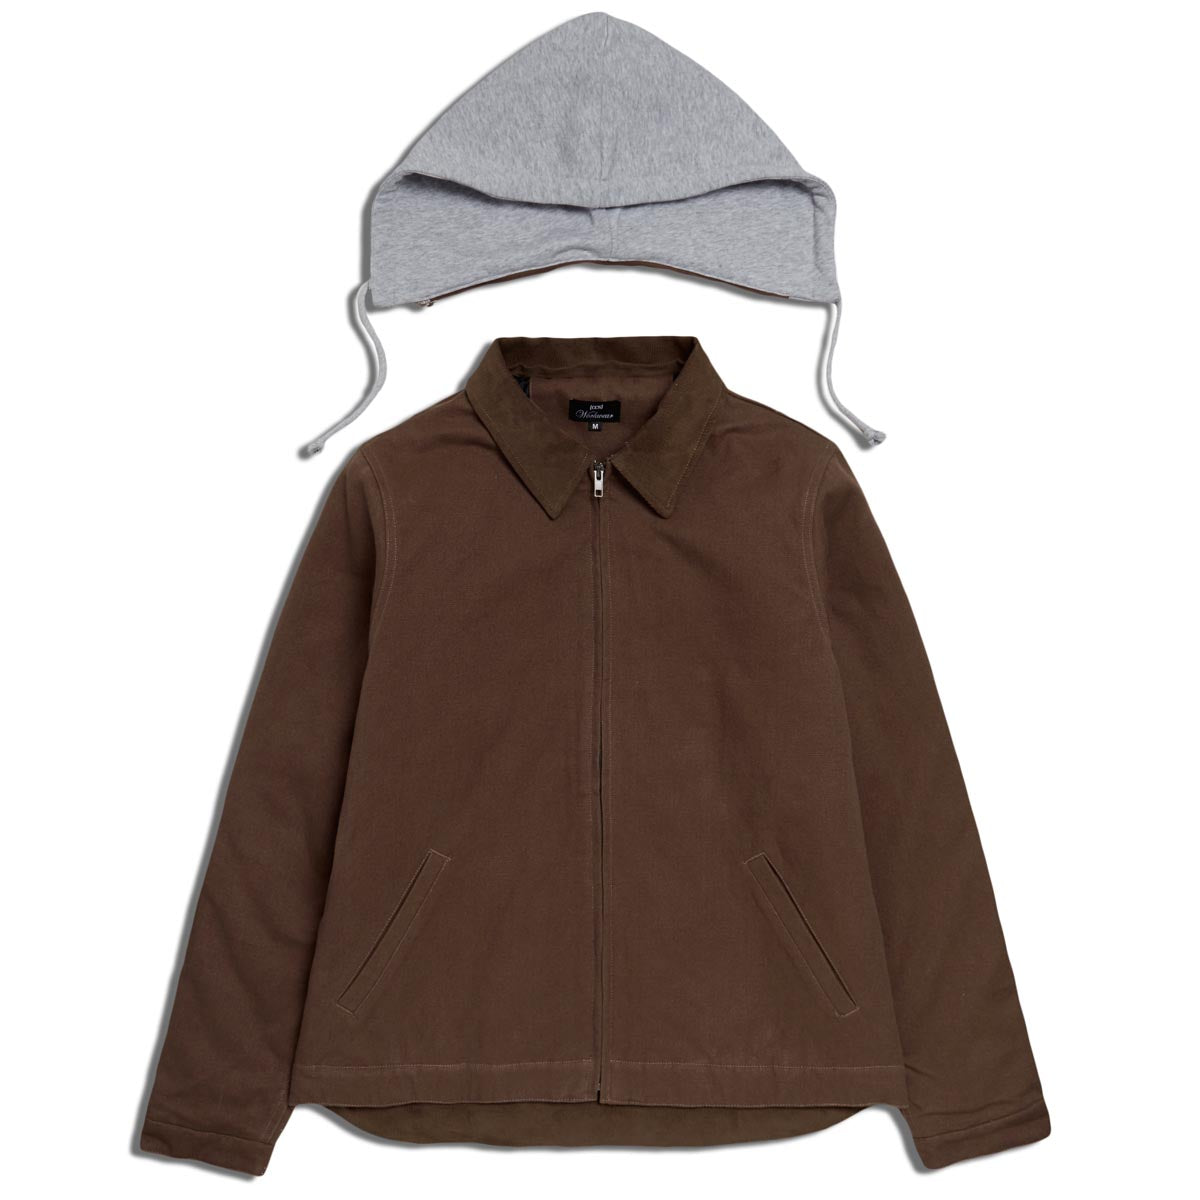 CCS Heavy Canvas Insulated Work Jacket - Brown image 3